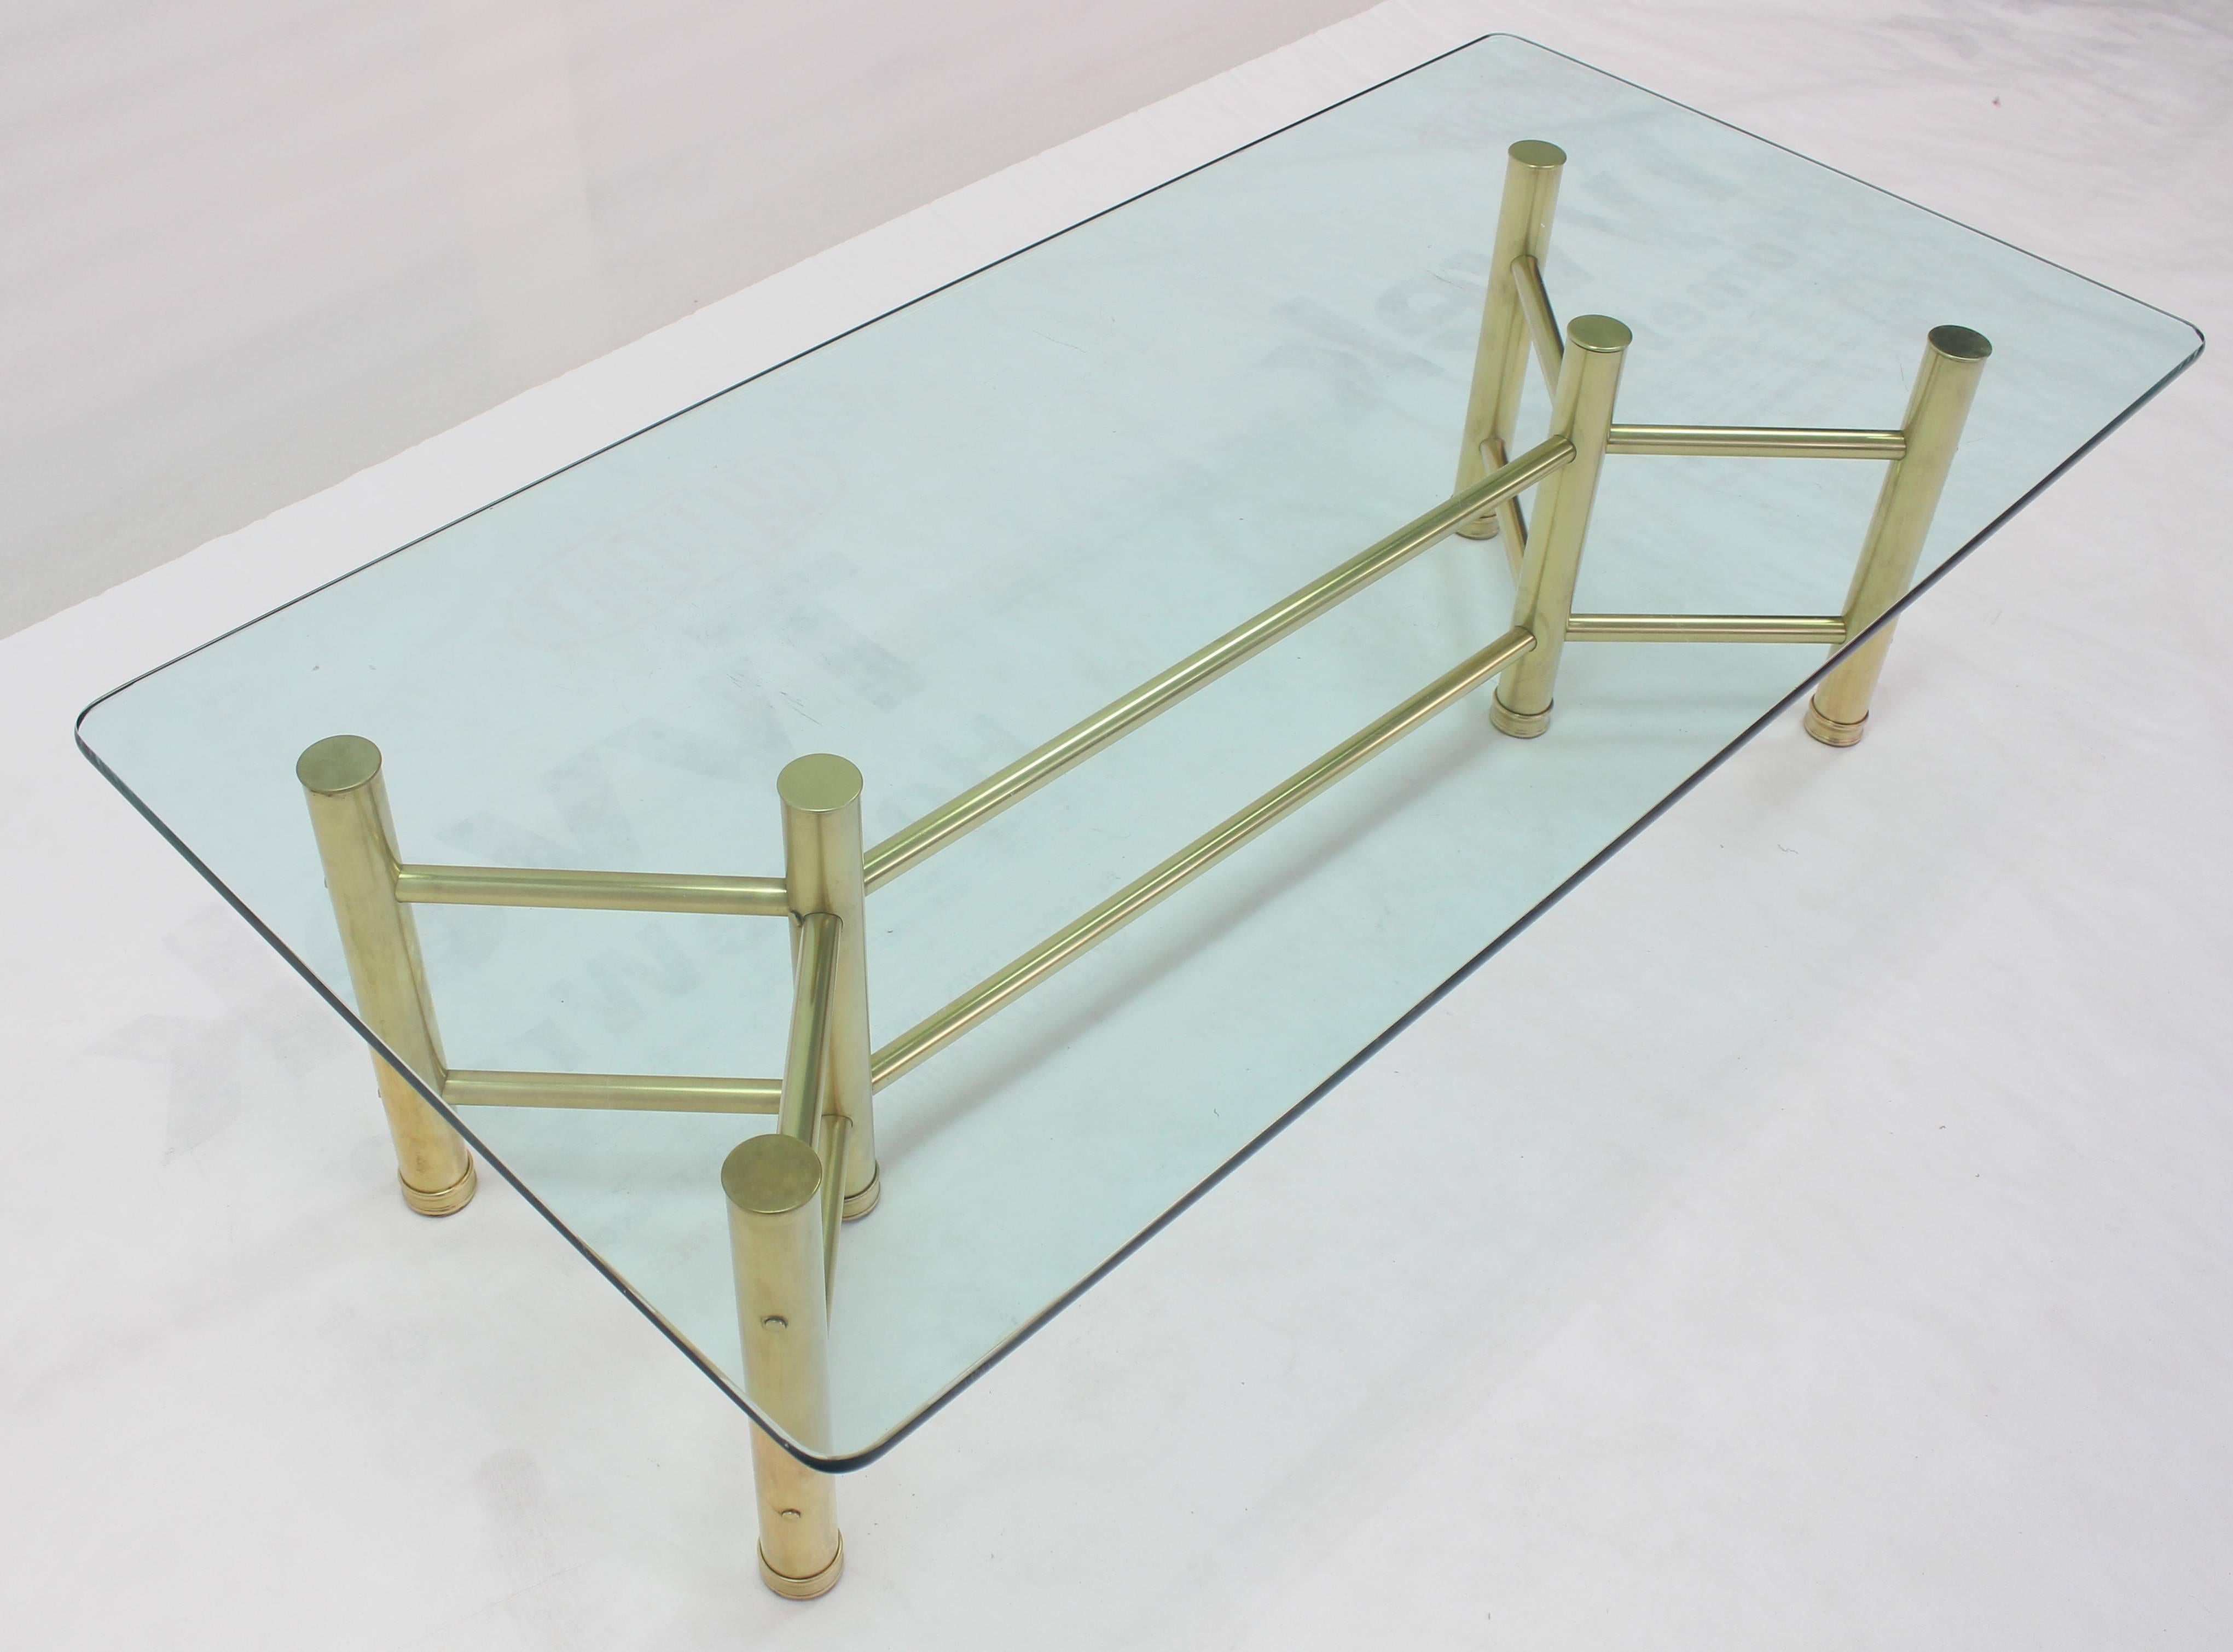 Solid Brass Tube Glass Top Rectangular Coffee Table In Excellent Condition For Sale In Rockaway, NJ